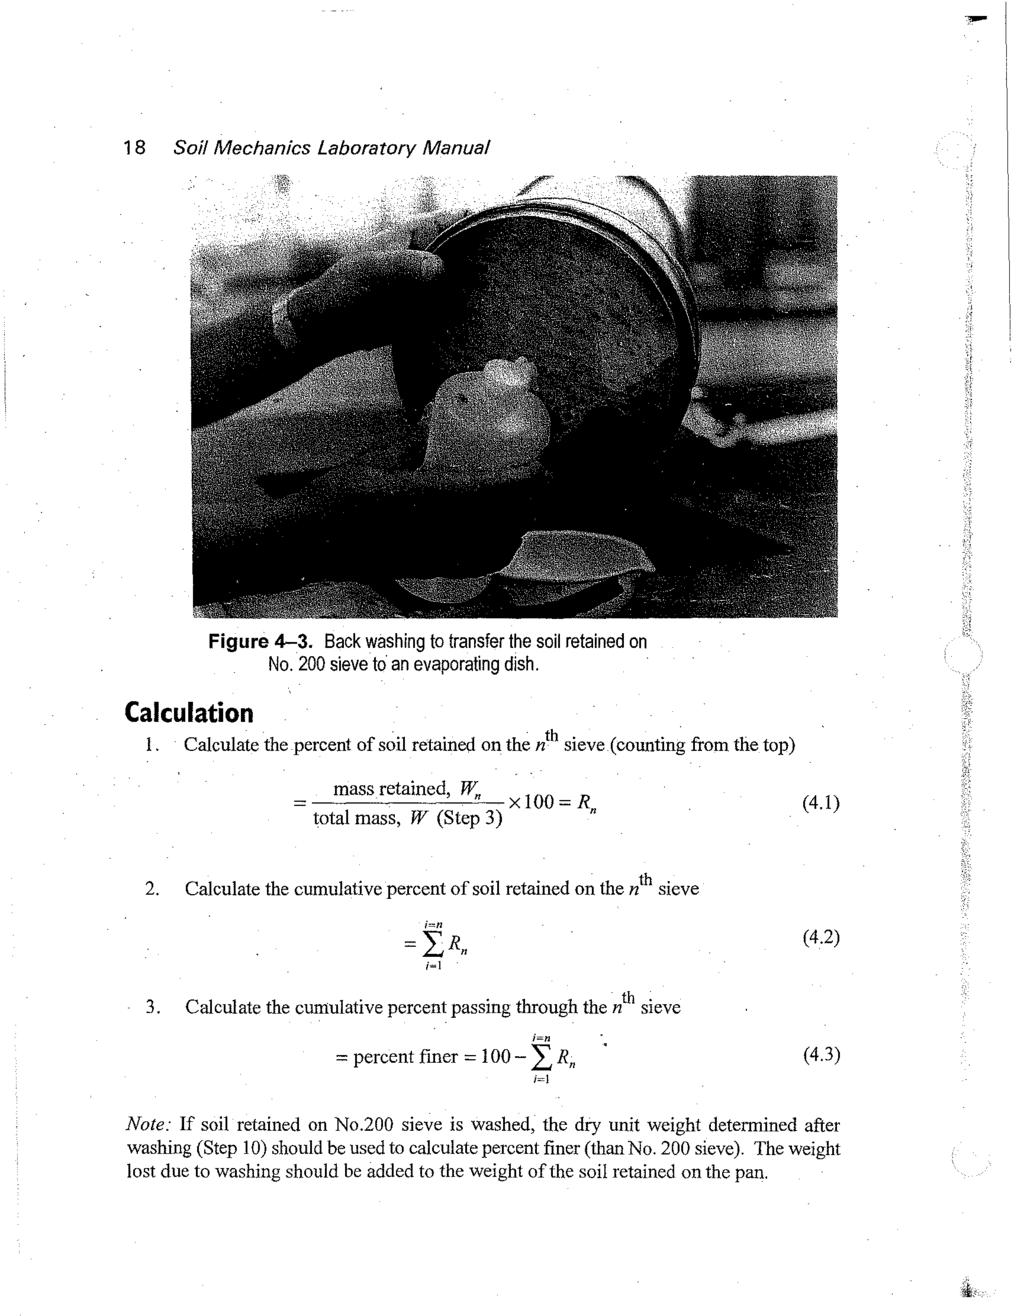 1 8 Soil Mechanics Laboratory Manual i--~ Figure 4-3. Back washing to transfer the soil retained on No. 200 sieve to an evaporating dish. Calculation 1.